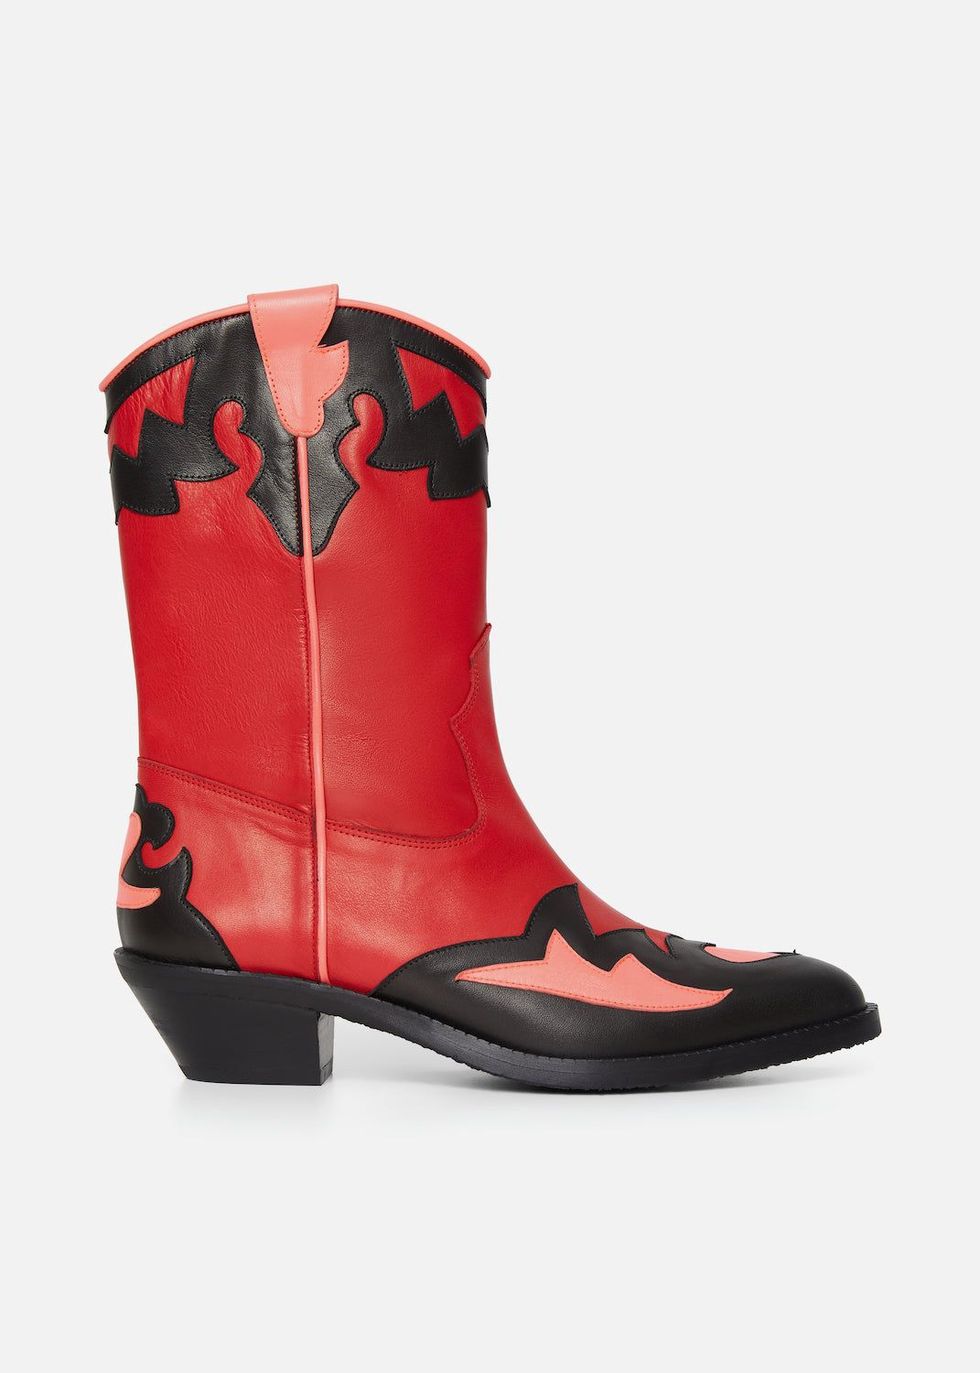 Red leather cowboy boots with contrast panel detailing